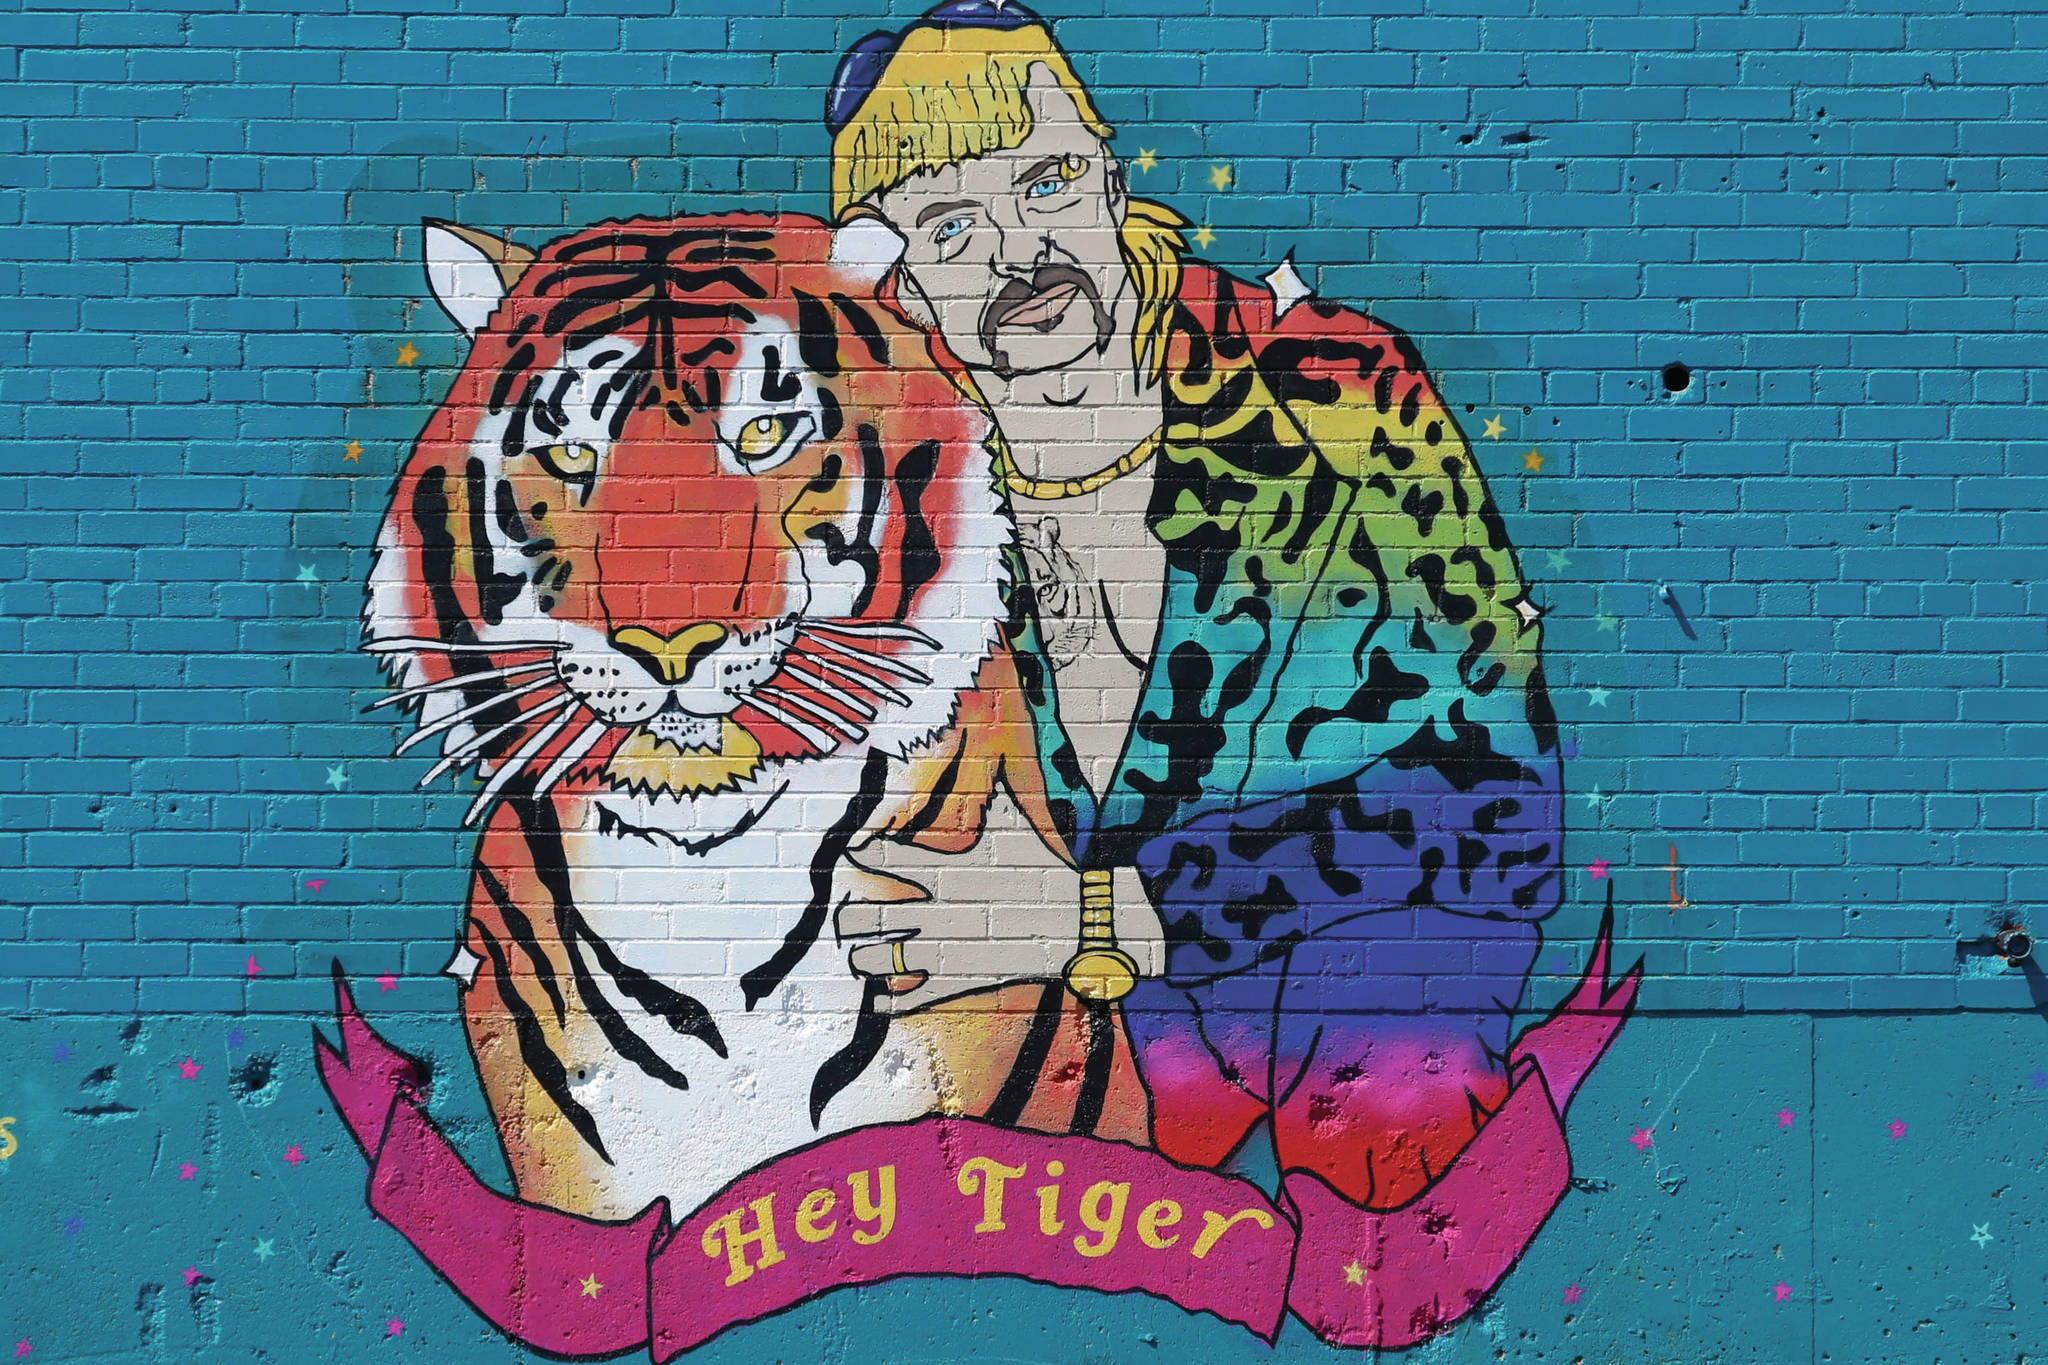 A mural depicting Joseph Maldonado-Passage, also known as as “Joe Exotic,” in Dallas, Friday, April 10, 2020. The Netflix series “Tiger King,” has become popular watching during the COVID-19 outbreak. Maldonado-Passage was convicted in an unsuccessful murder-for-hire plot. (AP Photo/LM Otero)